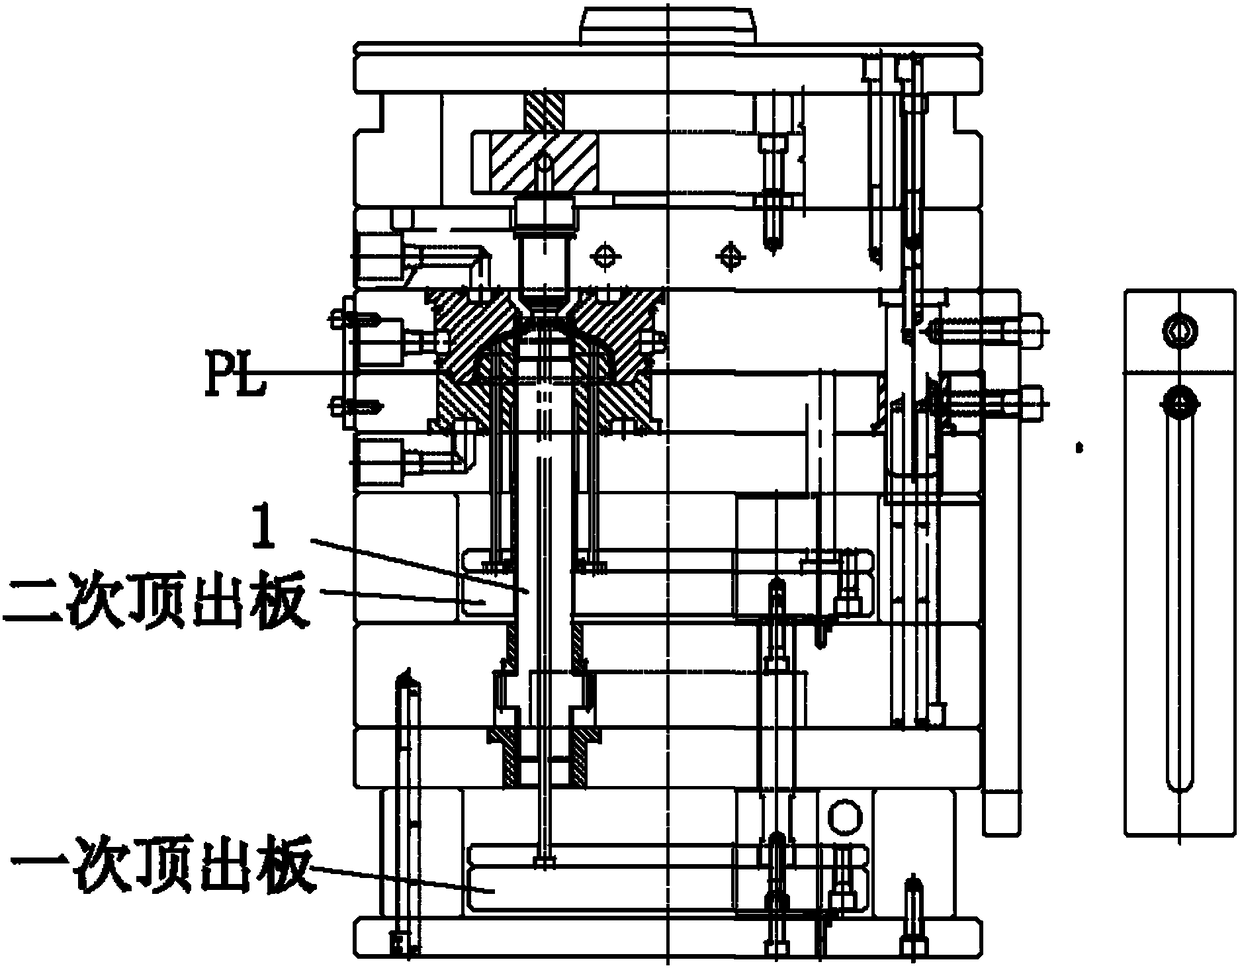 Injection mold for producing sewage treatment pipe